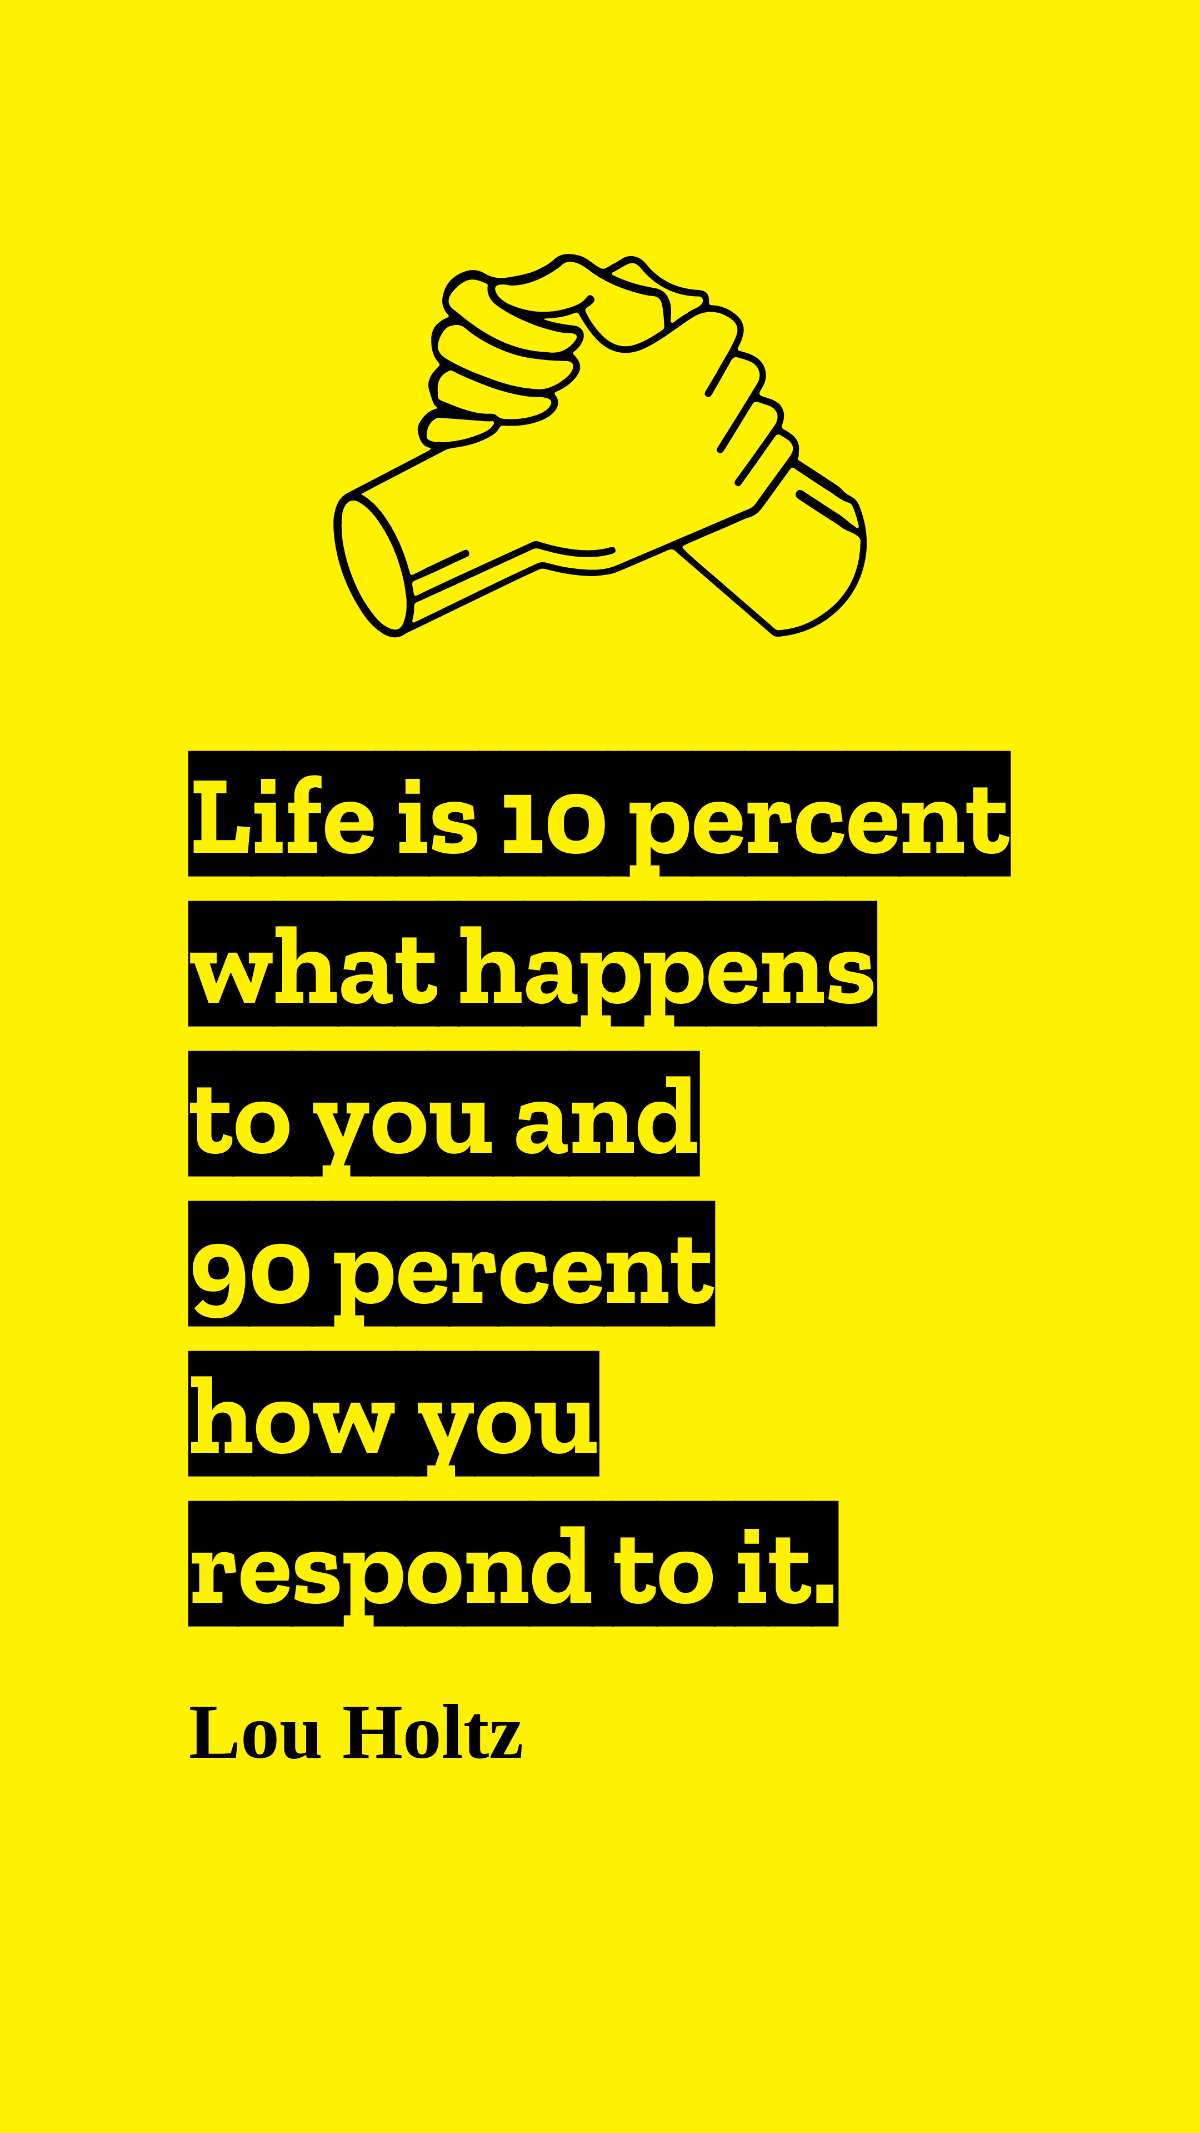 Lou Holtz - Life is 10 percent what happens to you and 90 percent how you respond to it. Template